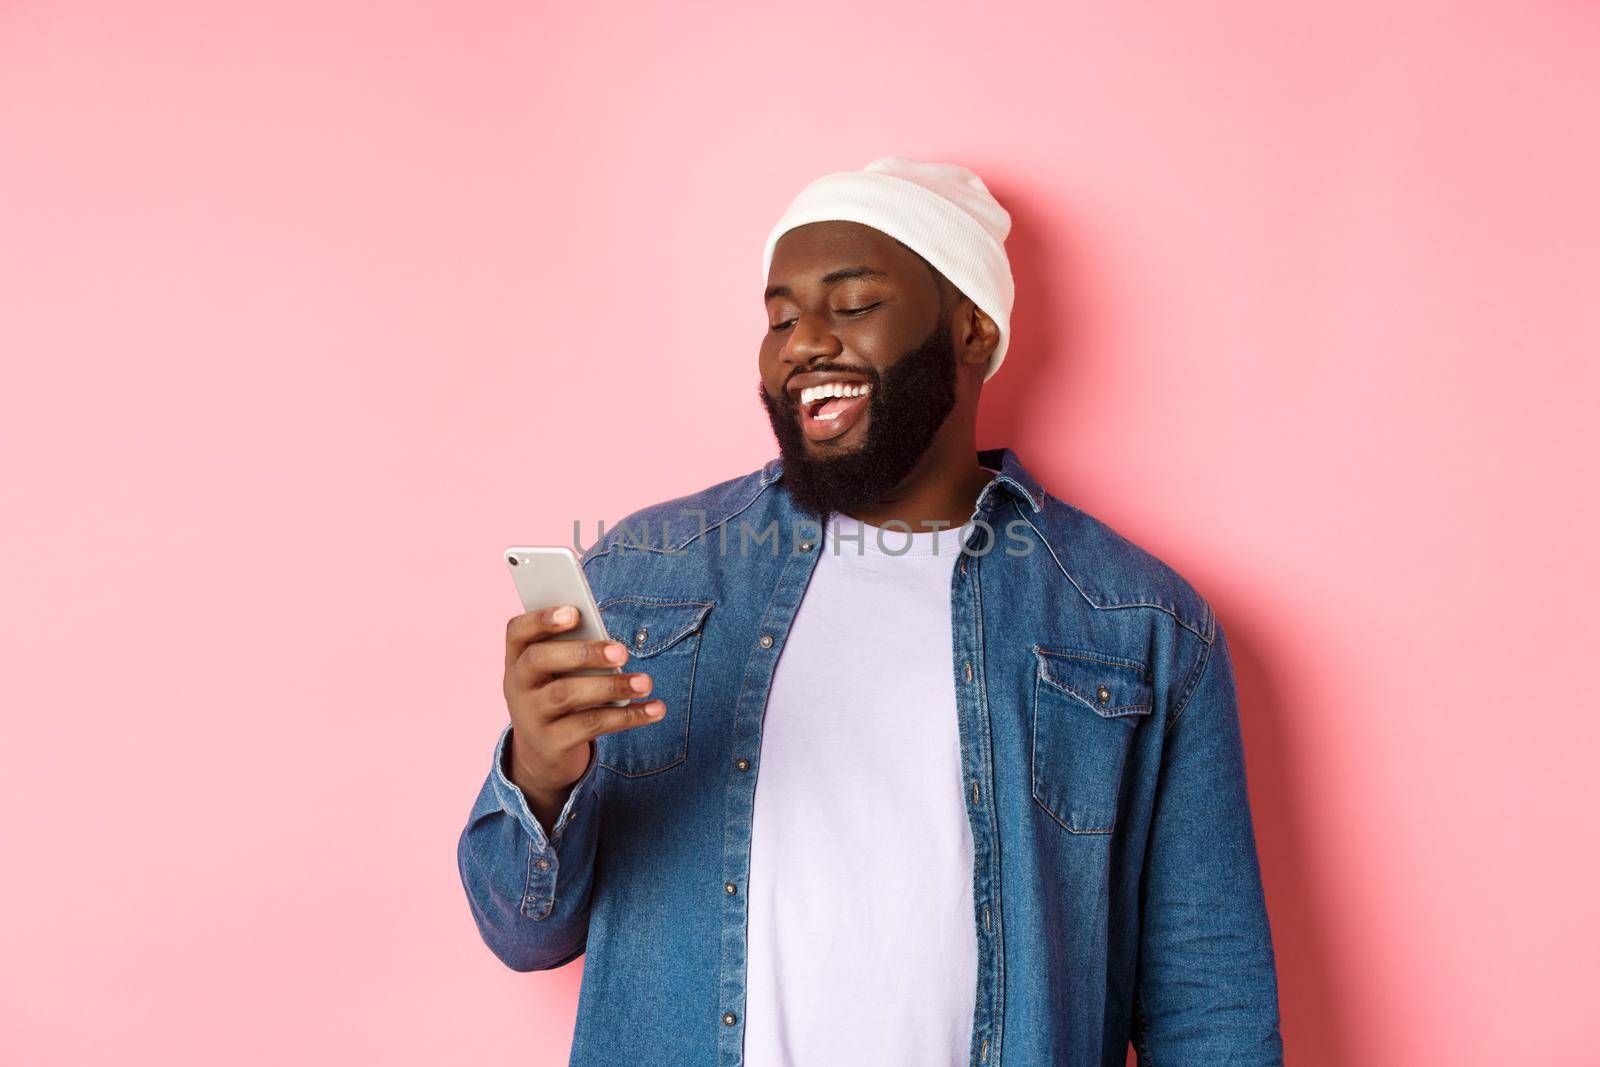 Technology and online shopping concept. Happy Black bearded man reading message and smiling, using smartphone against pink background.